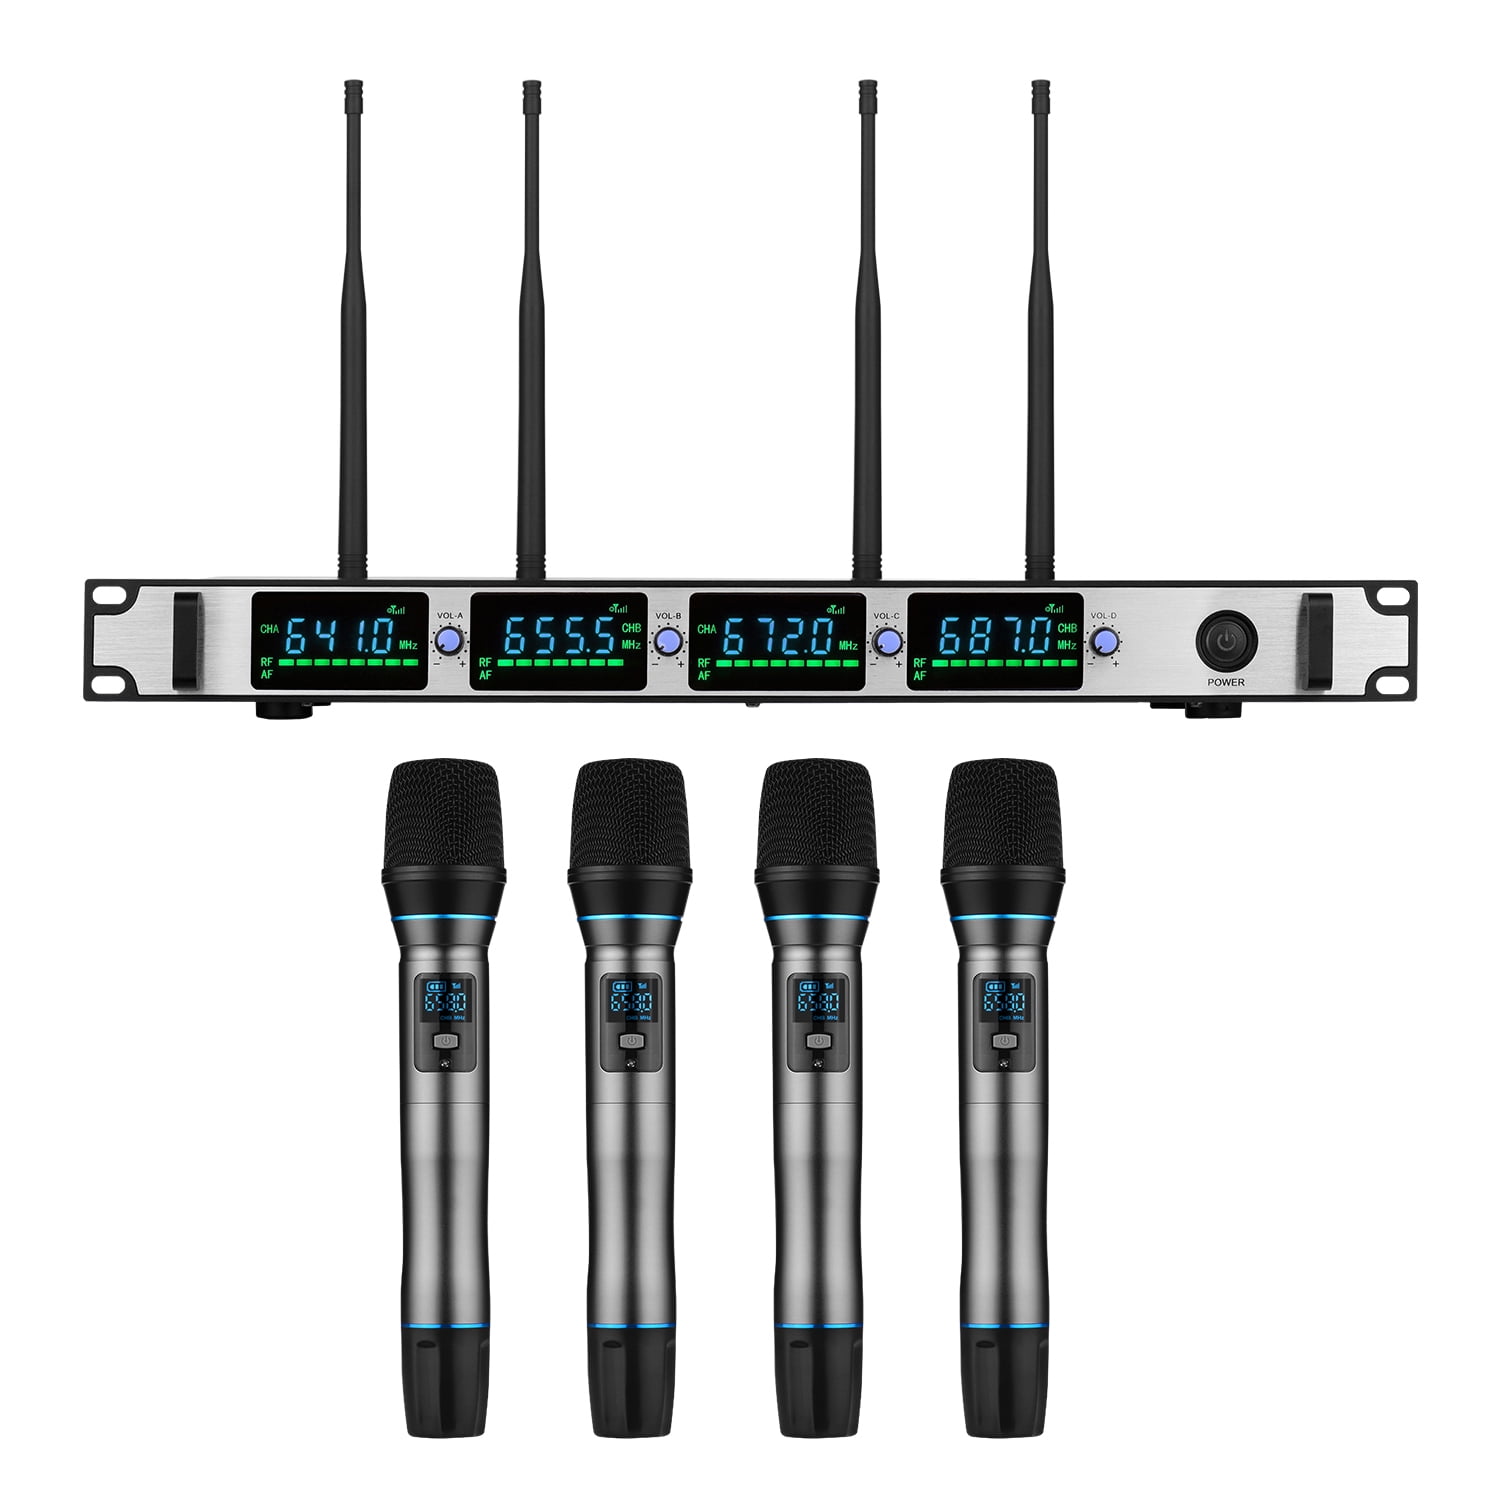 Professional Wireless Microphone System 4-Channel UHF Cordless Mic Set with  4 Handheld Mics & 1 Rack-Mount Receiver for Karaoke Meeting Speech Party 